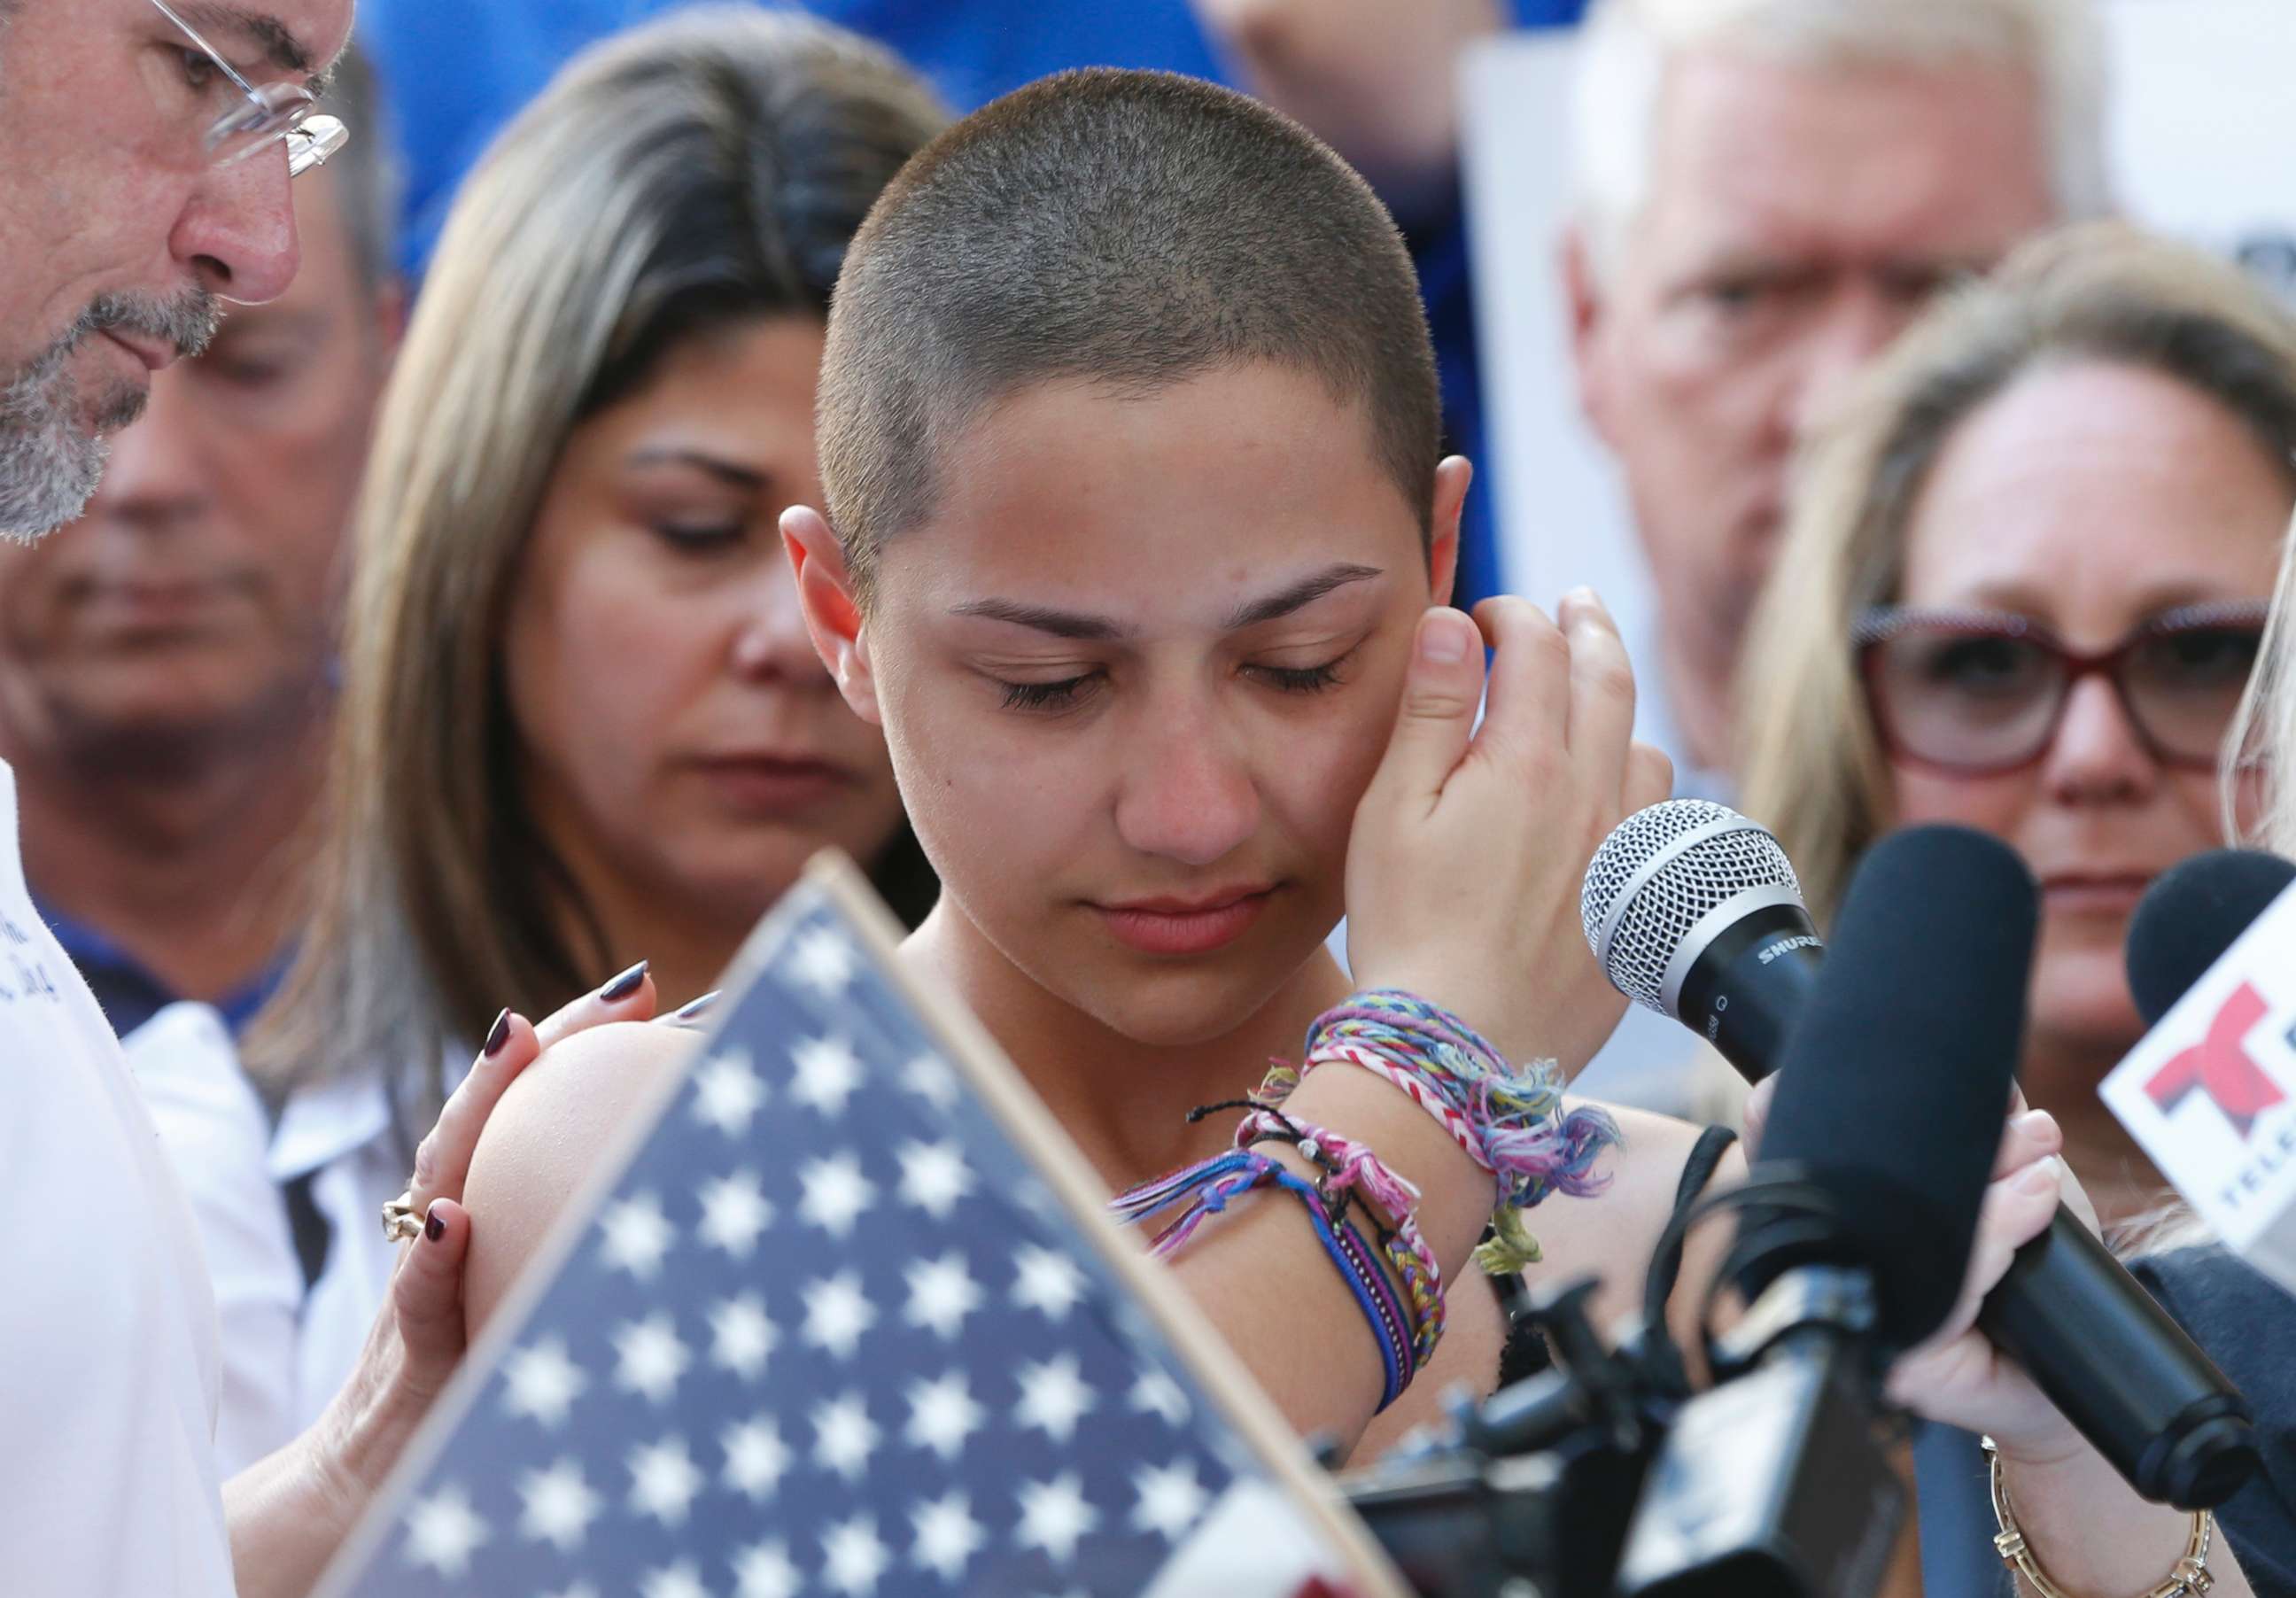 PHOTO: Marjory Stoneman Douglas High School student Emma Gonzalez speaks at a rally for gun control at the Broward County Federal Courthouse in Fort Lauderdale, Fla.,  on Feb. 17, 2018.